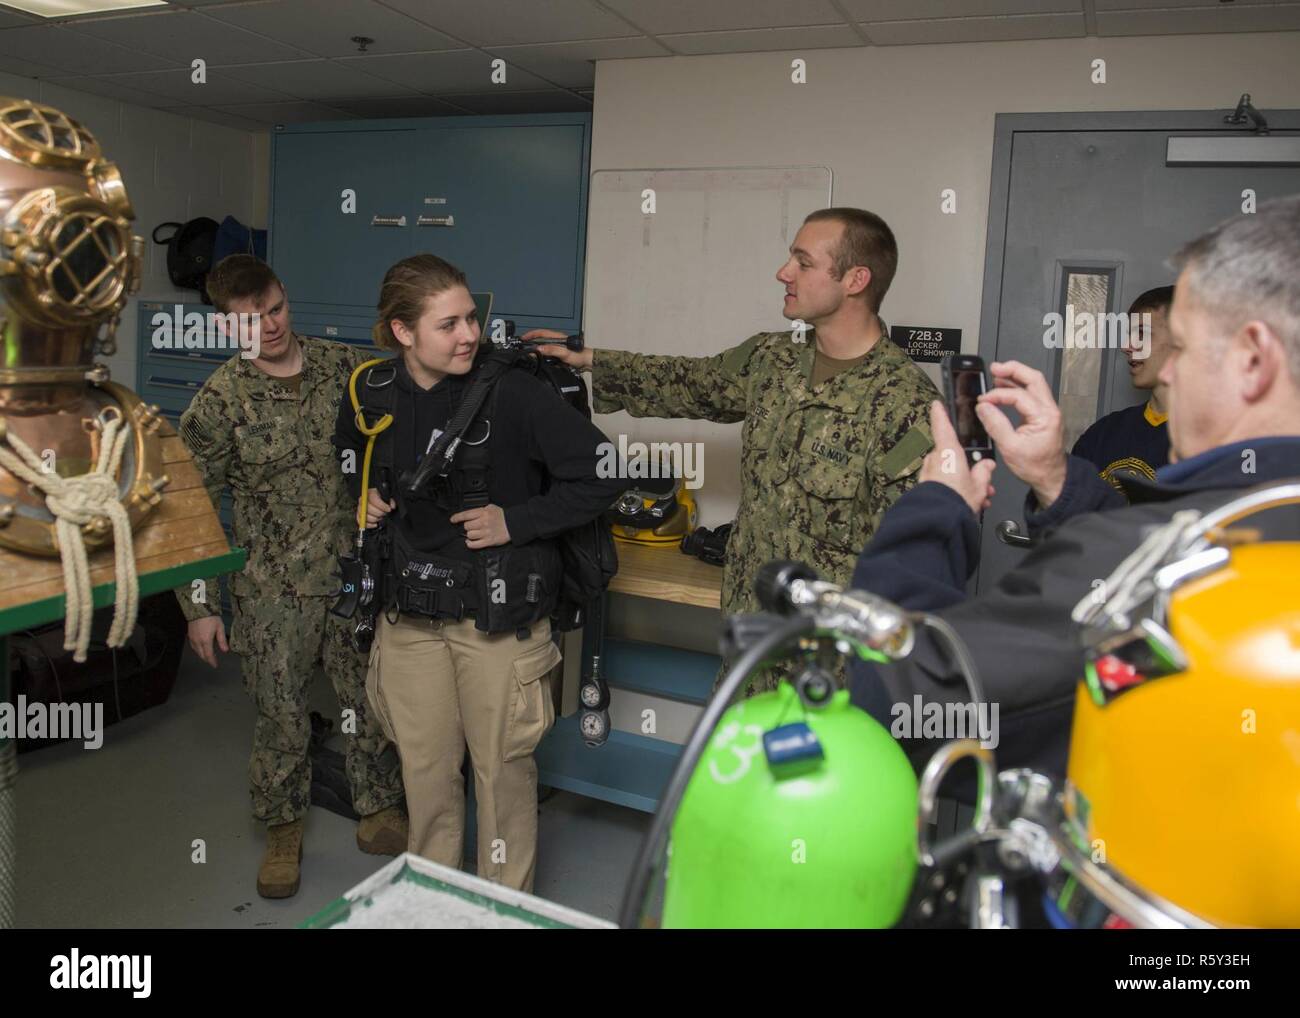 EVERETT, Wash. (April 20, 2017) Navy Diver 2nd Class Eric J. Lehman (Left) and Navy Diver 2nd Class Justin R. Rivere, assigned to the Puget Sound Navy Shipyard and Intermediate Maintenance Facility dive locker, demonstrate the weight of a self contained underwater breathing apparatus (SCUBA) during a Burlington-Edison High School Navy Junior Recruit Officer Training Command (JROTC) visit to the Navy dive locker at Naval Station Everett (NSE). While aboard NSE the Burlington-Edison High School JROTC toured the Navy dive locker, received a briefing on the use of a hyperbaric chamber and watched  Stock Photo